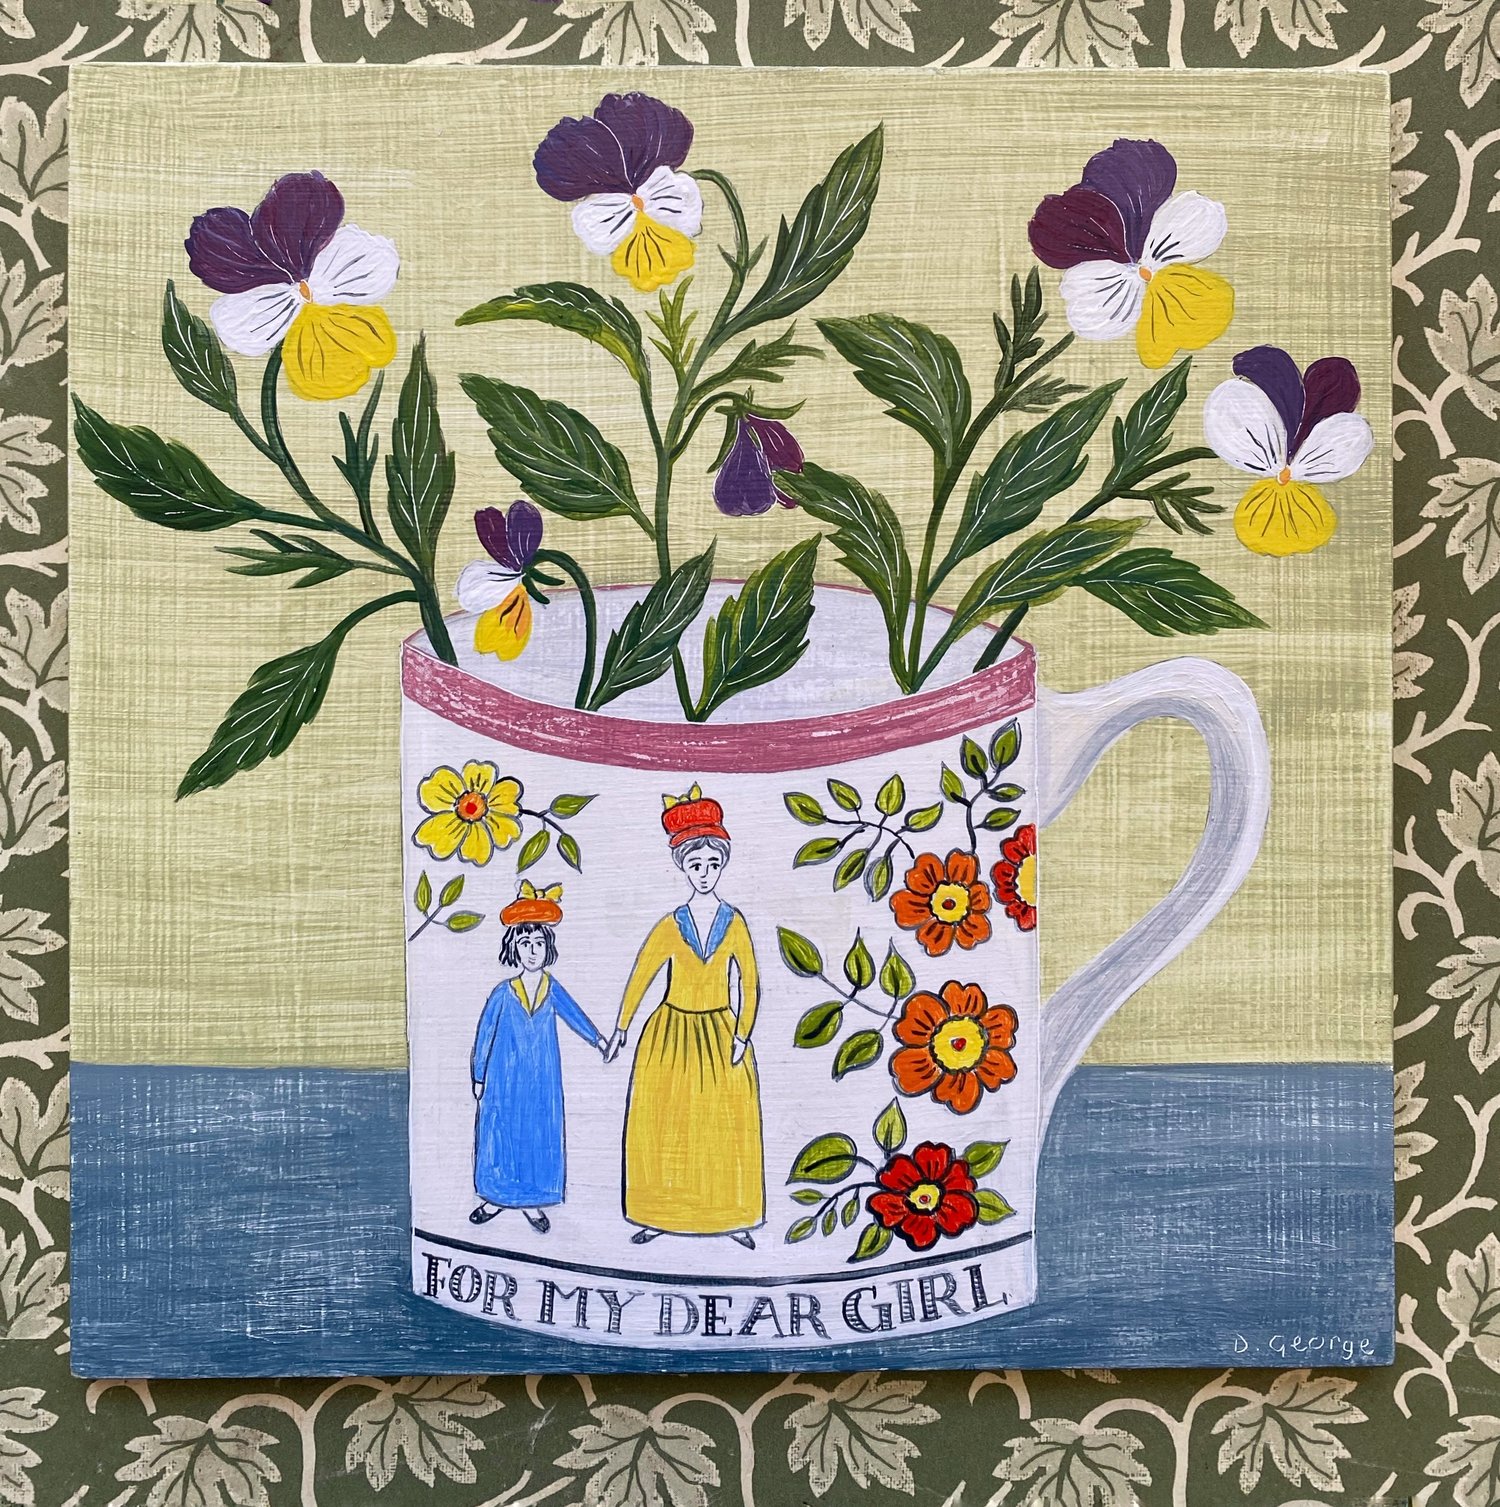 Image of Dear girl cup and wild Pansies